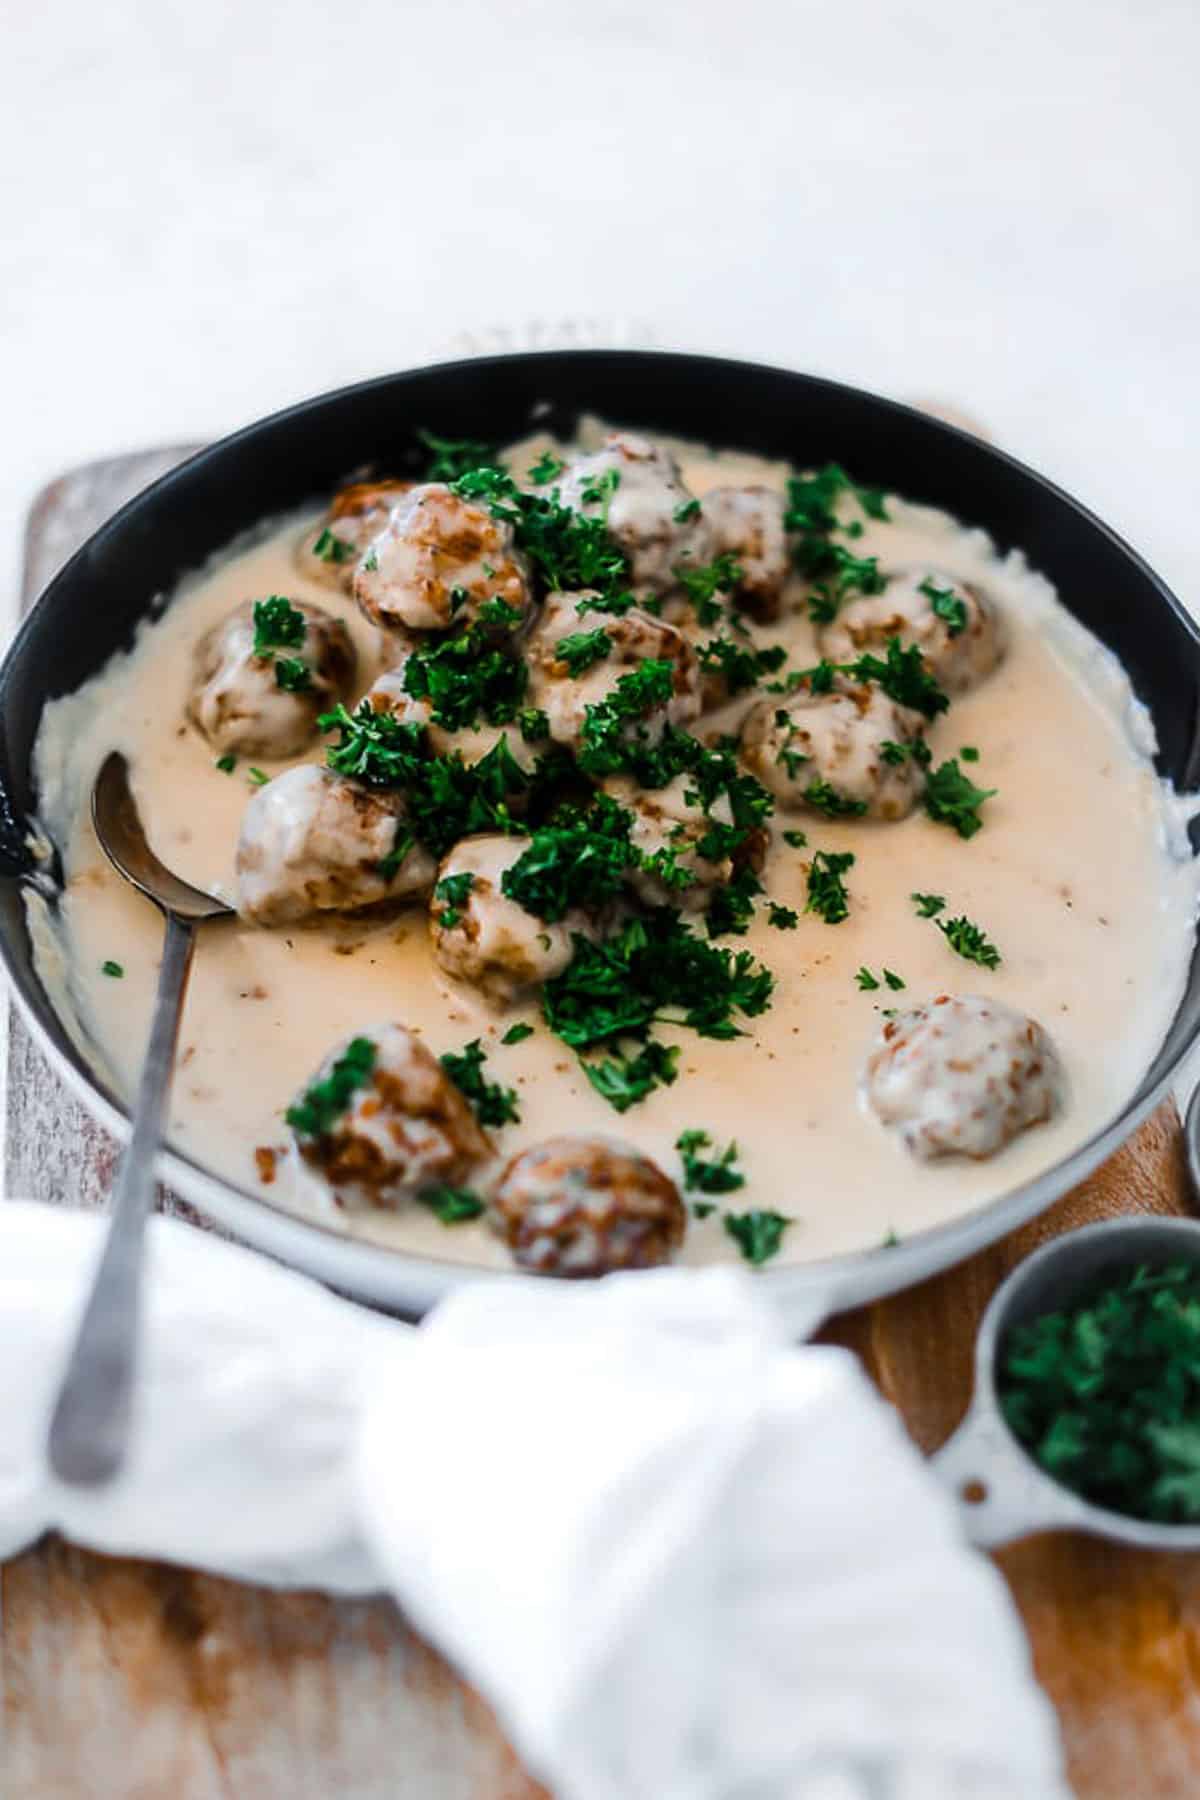 Swedish meatballs in a cast iron skillet, smothered in gravy.